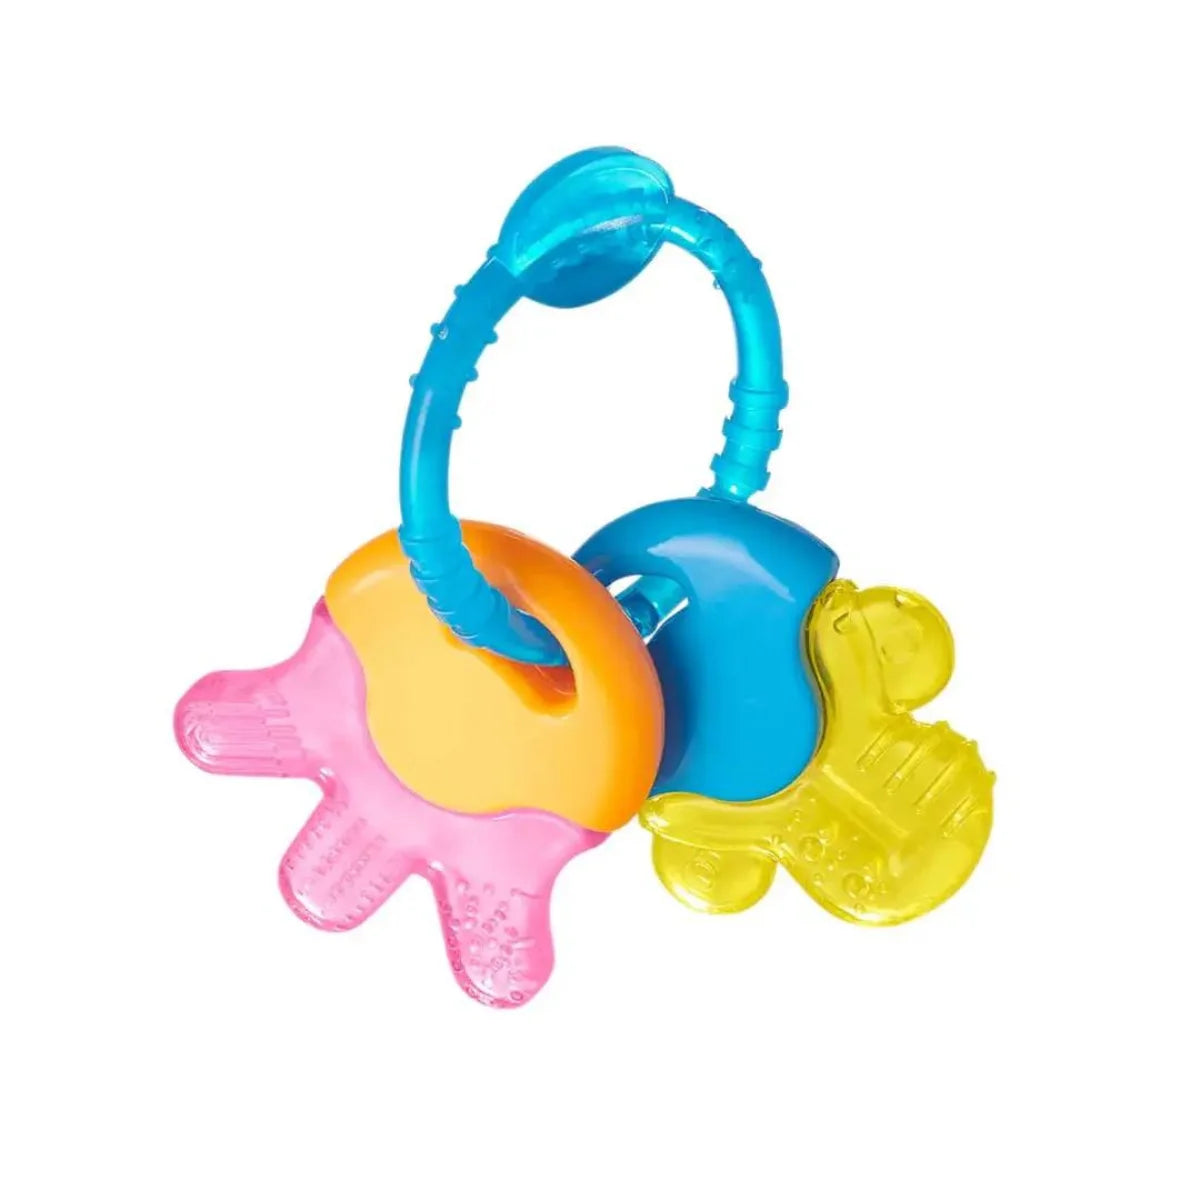 blue and yellow and pink and orange cool&calm baby teether keys included in brushbaby baby-on-the-go bundle